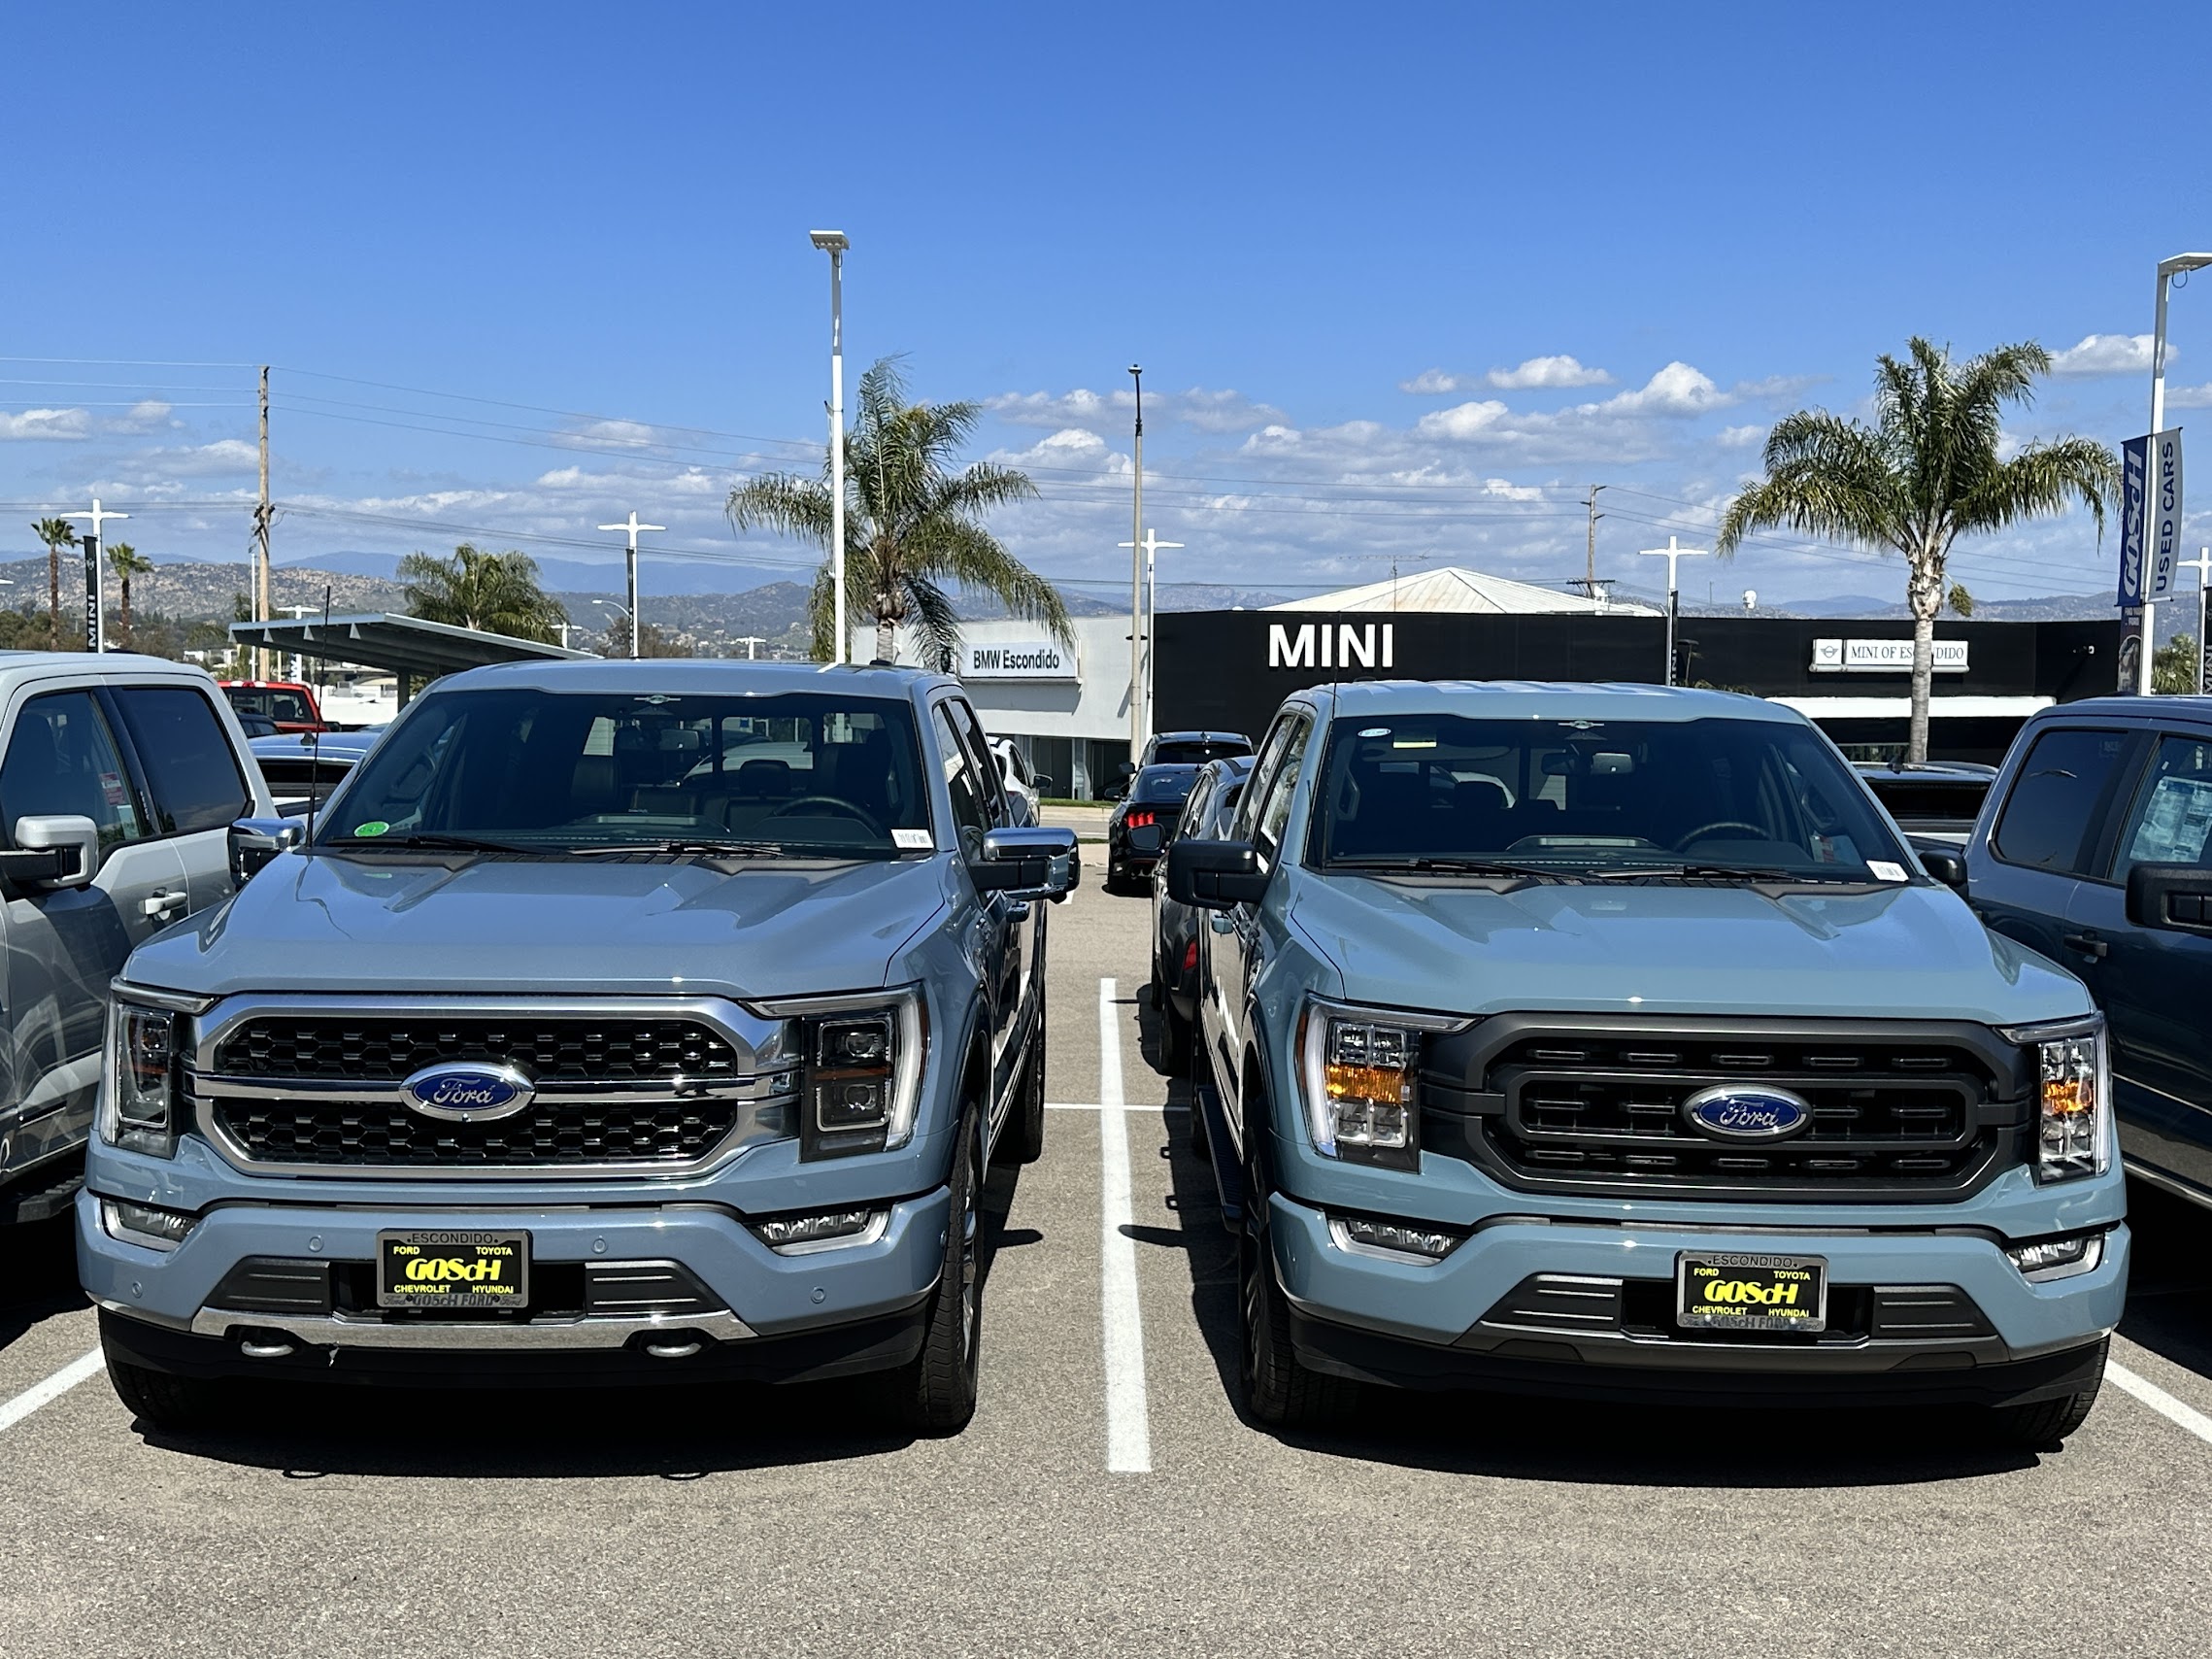 Is Making A COLOR CHOICE On A New Ford F150 Giving You The BLUES? Let